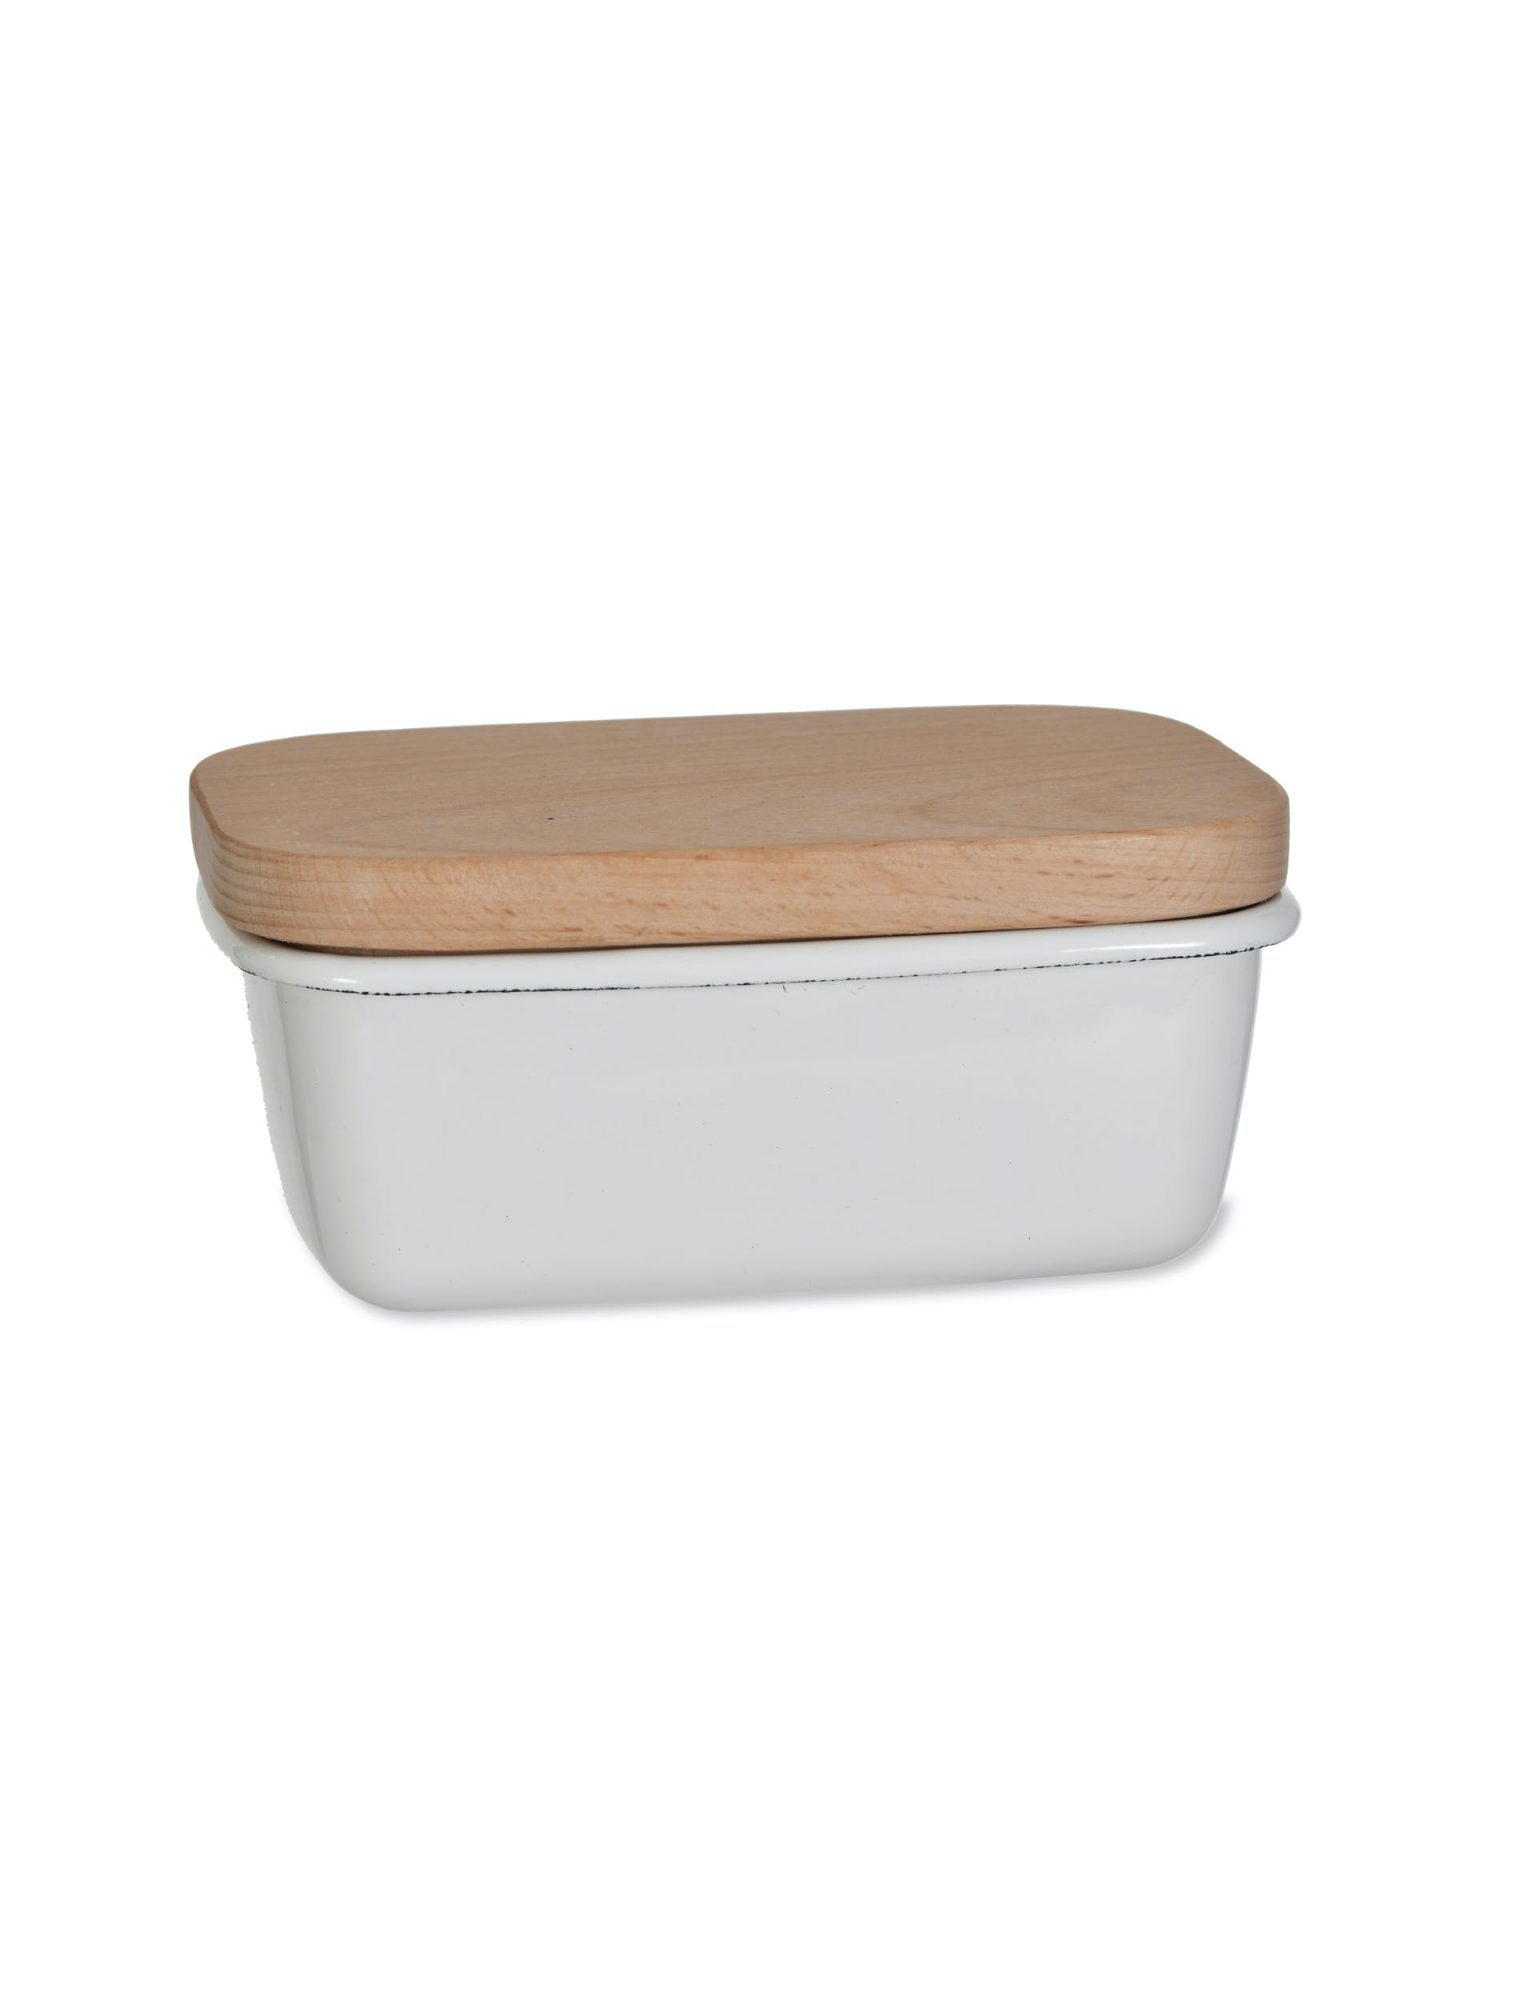 Enamel Butter Dish with Beech Lid | Buy Online Here - Portmeirion Online